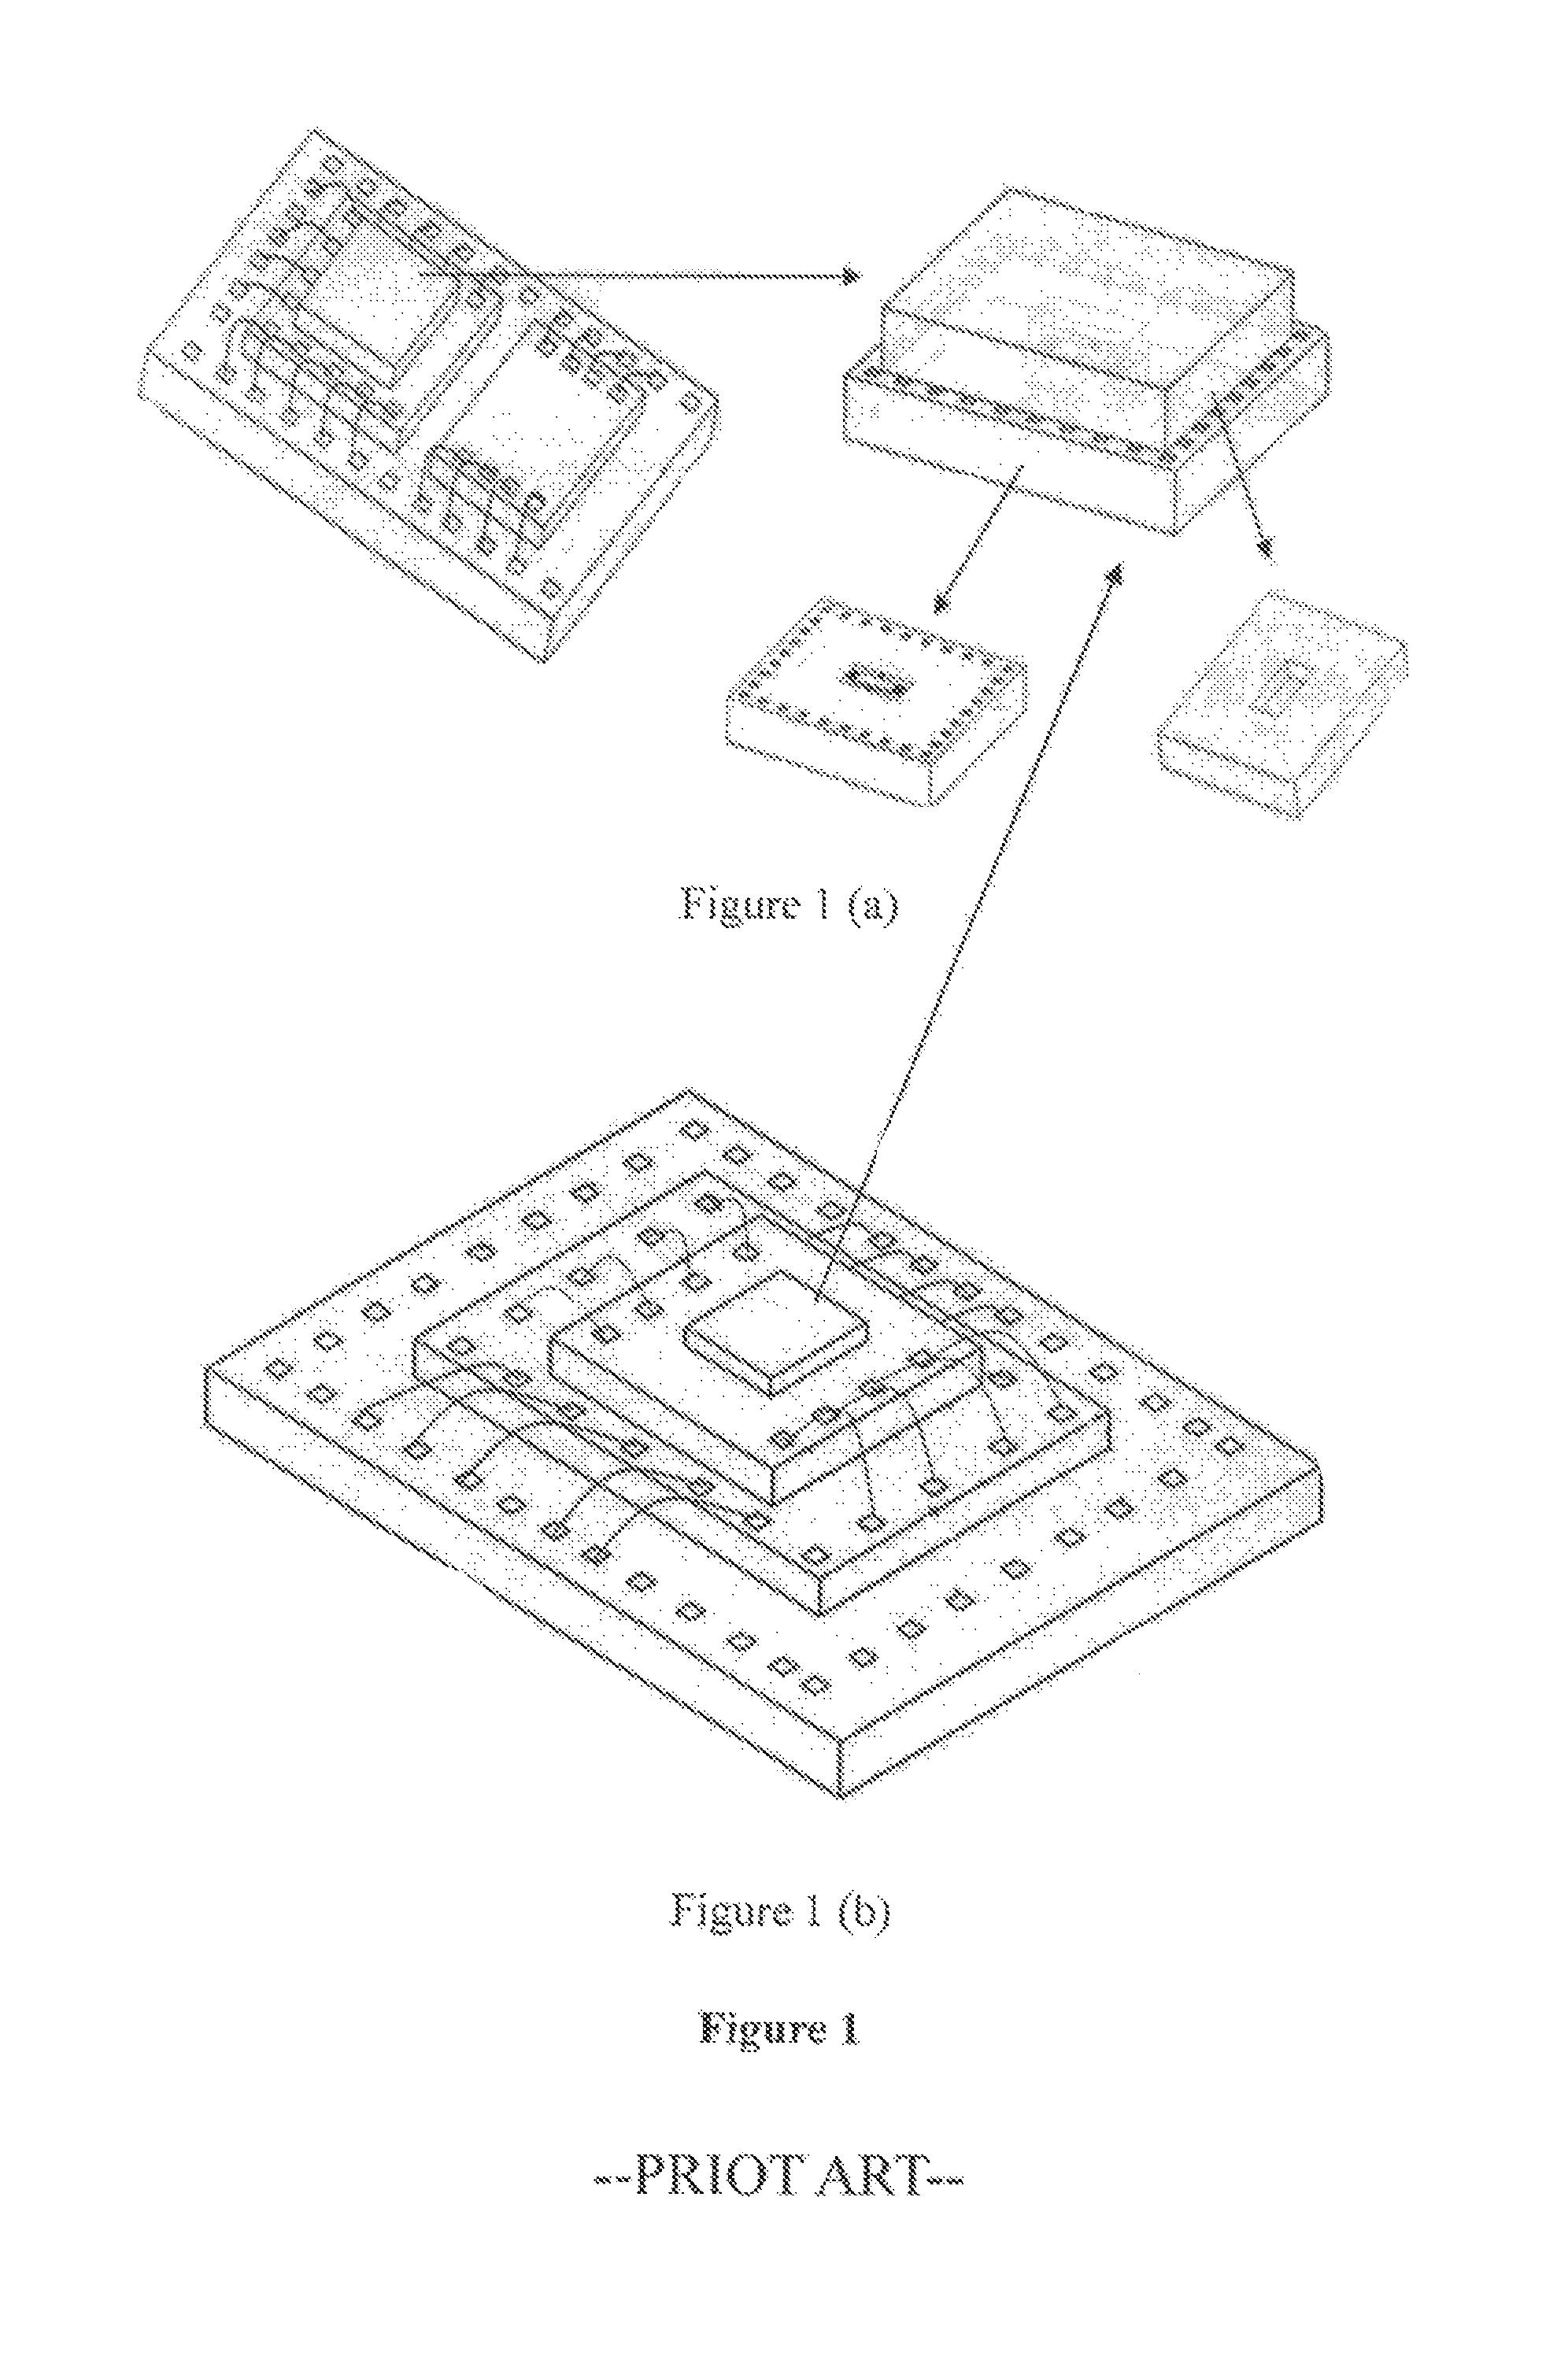 Method for packaging micromachined devices